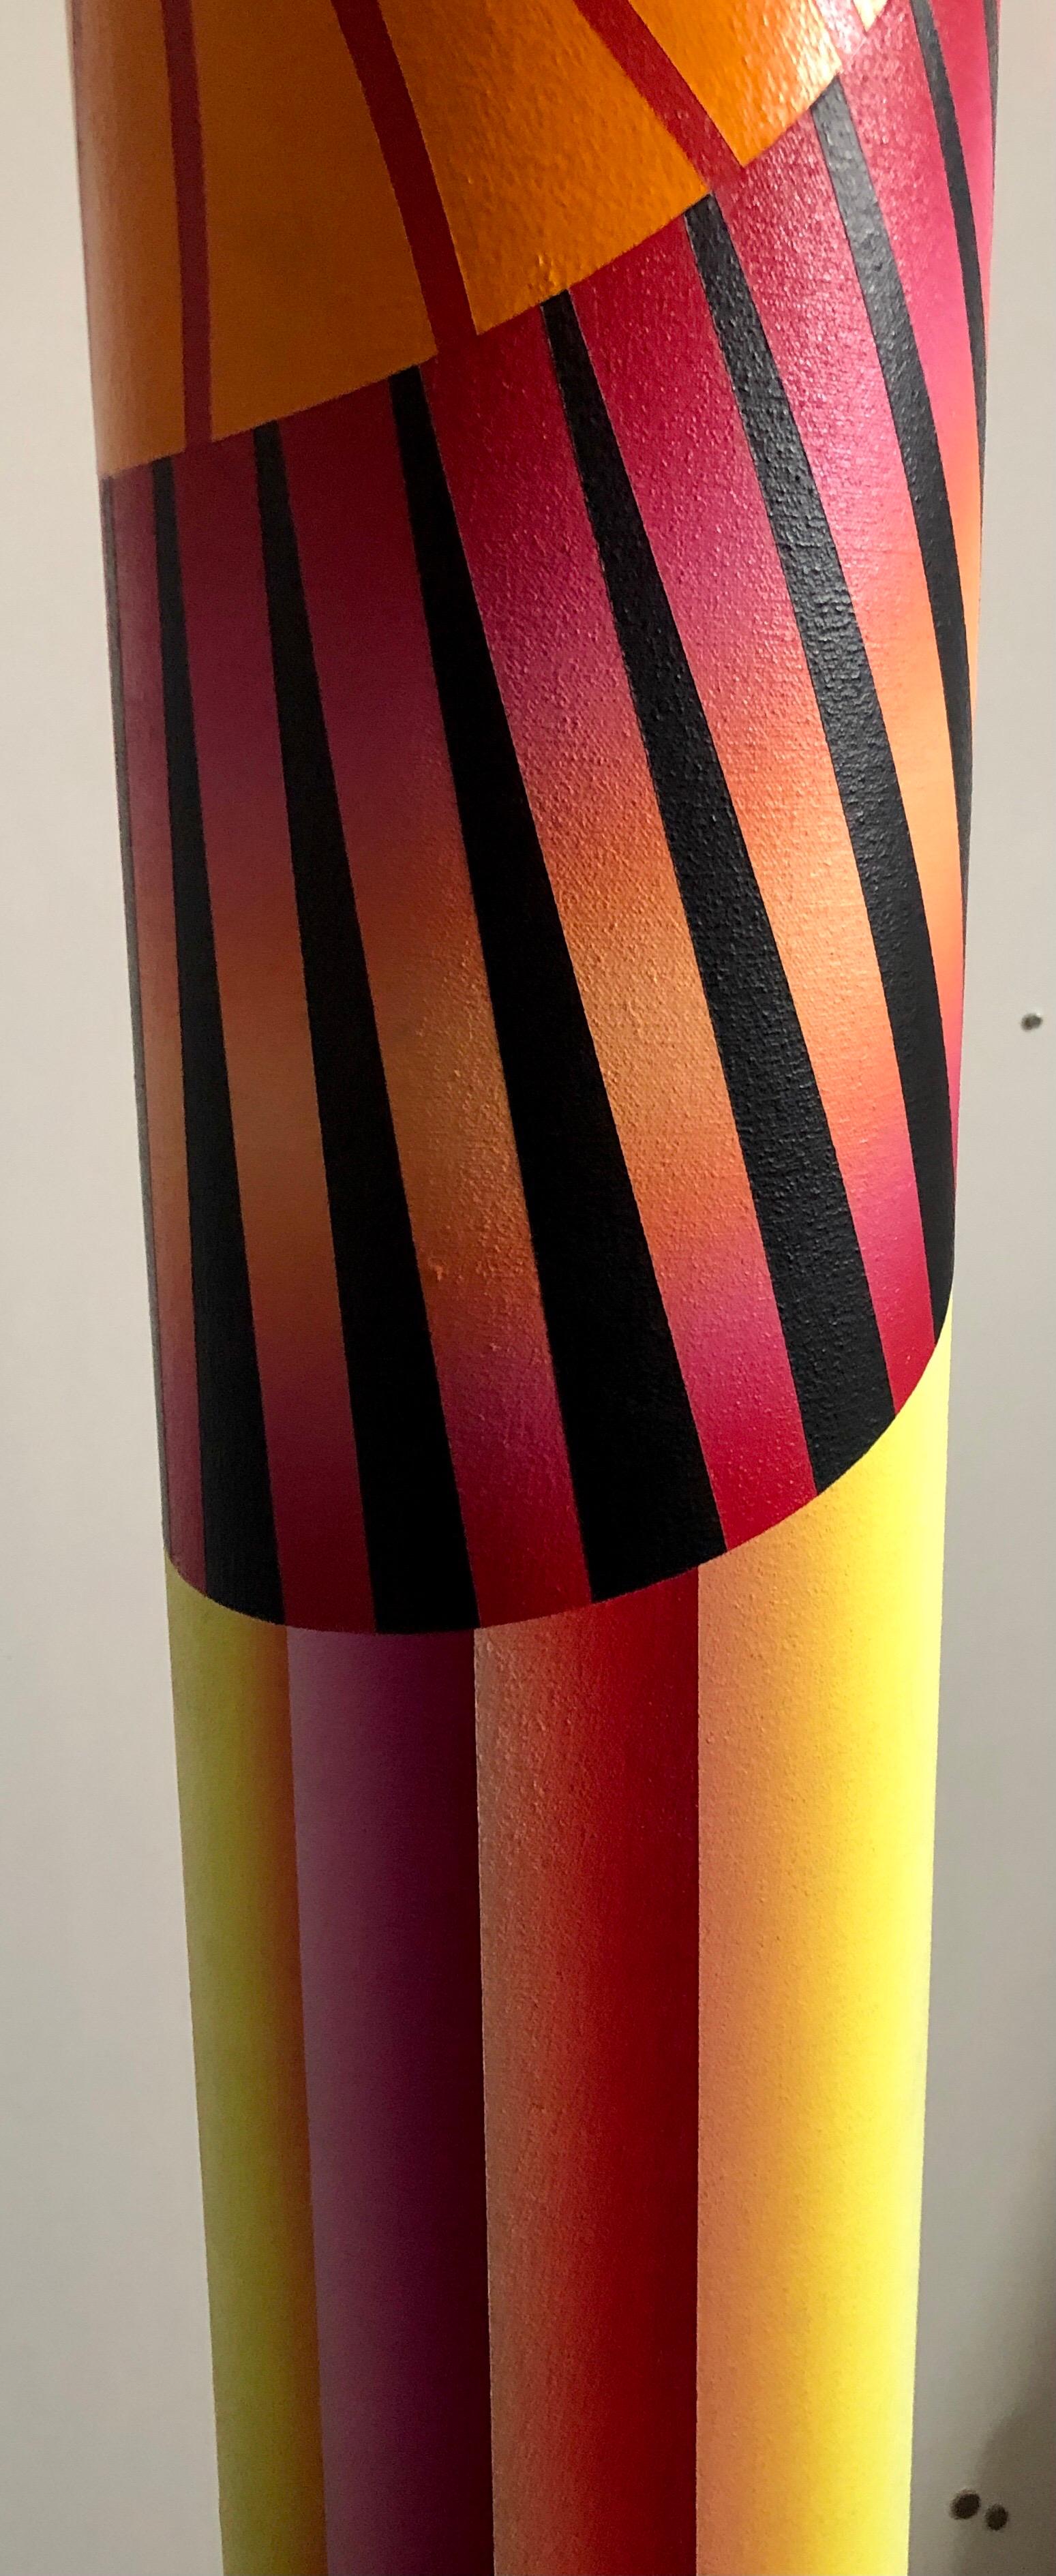 George Snyder
Acrylic painting on canvas tubular sculpture
Abstract composition of blue, purple, orange, red, yellow, and black geometric shapes on rolled canvas tube. 
Signed, dated, and titled 